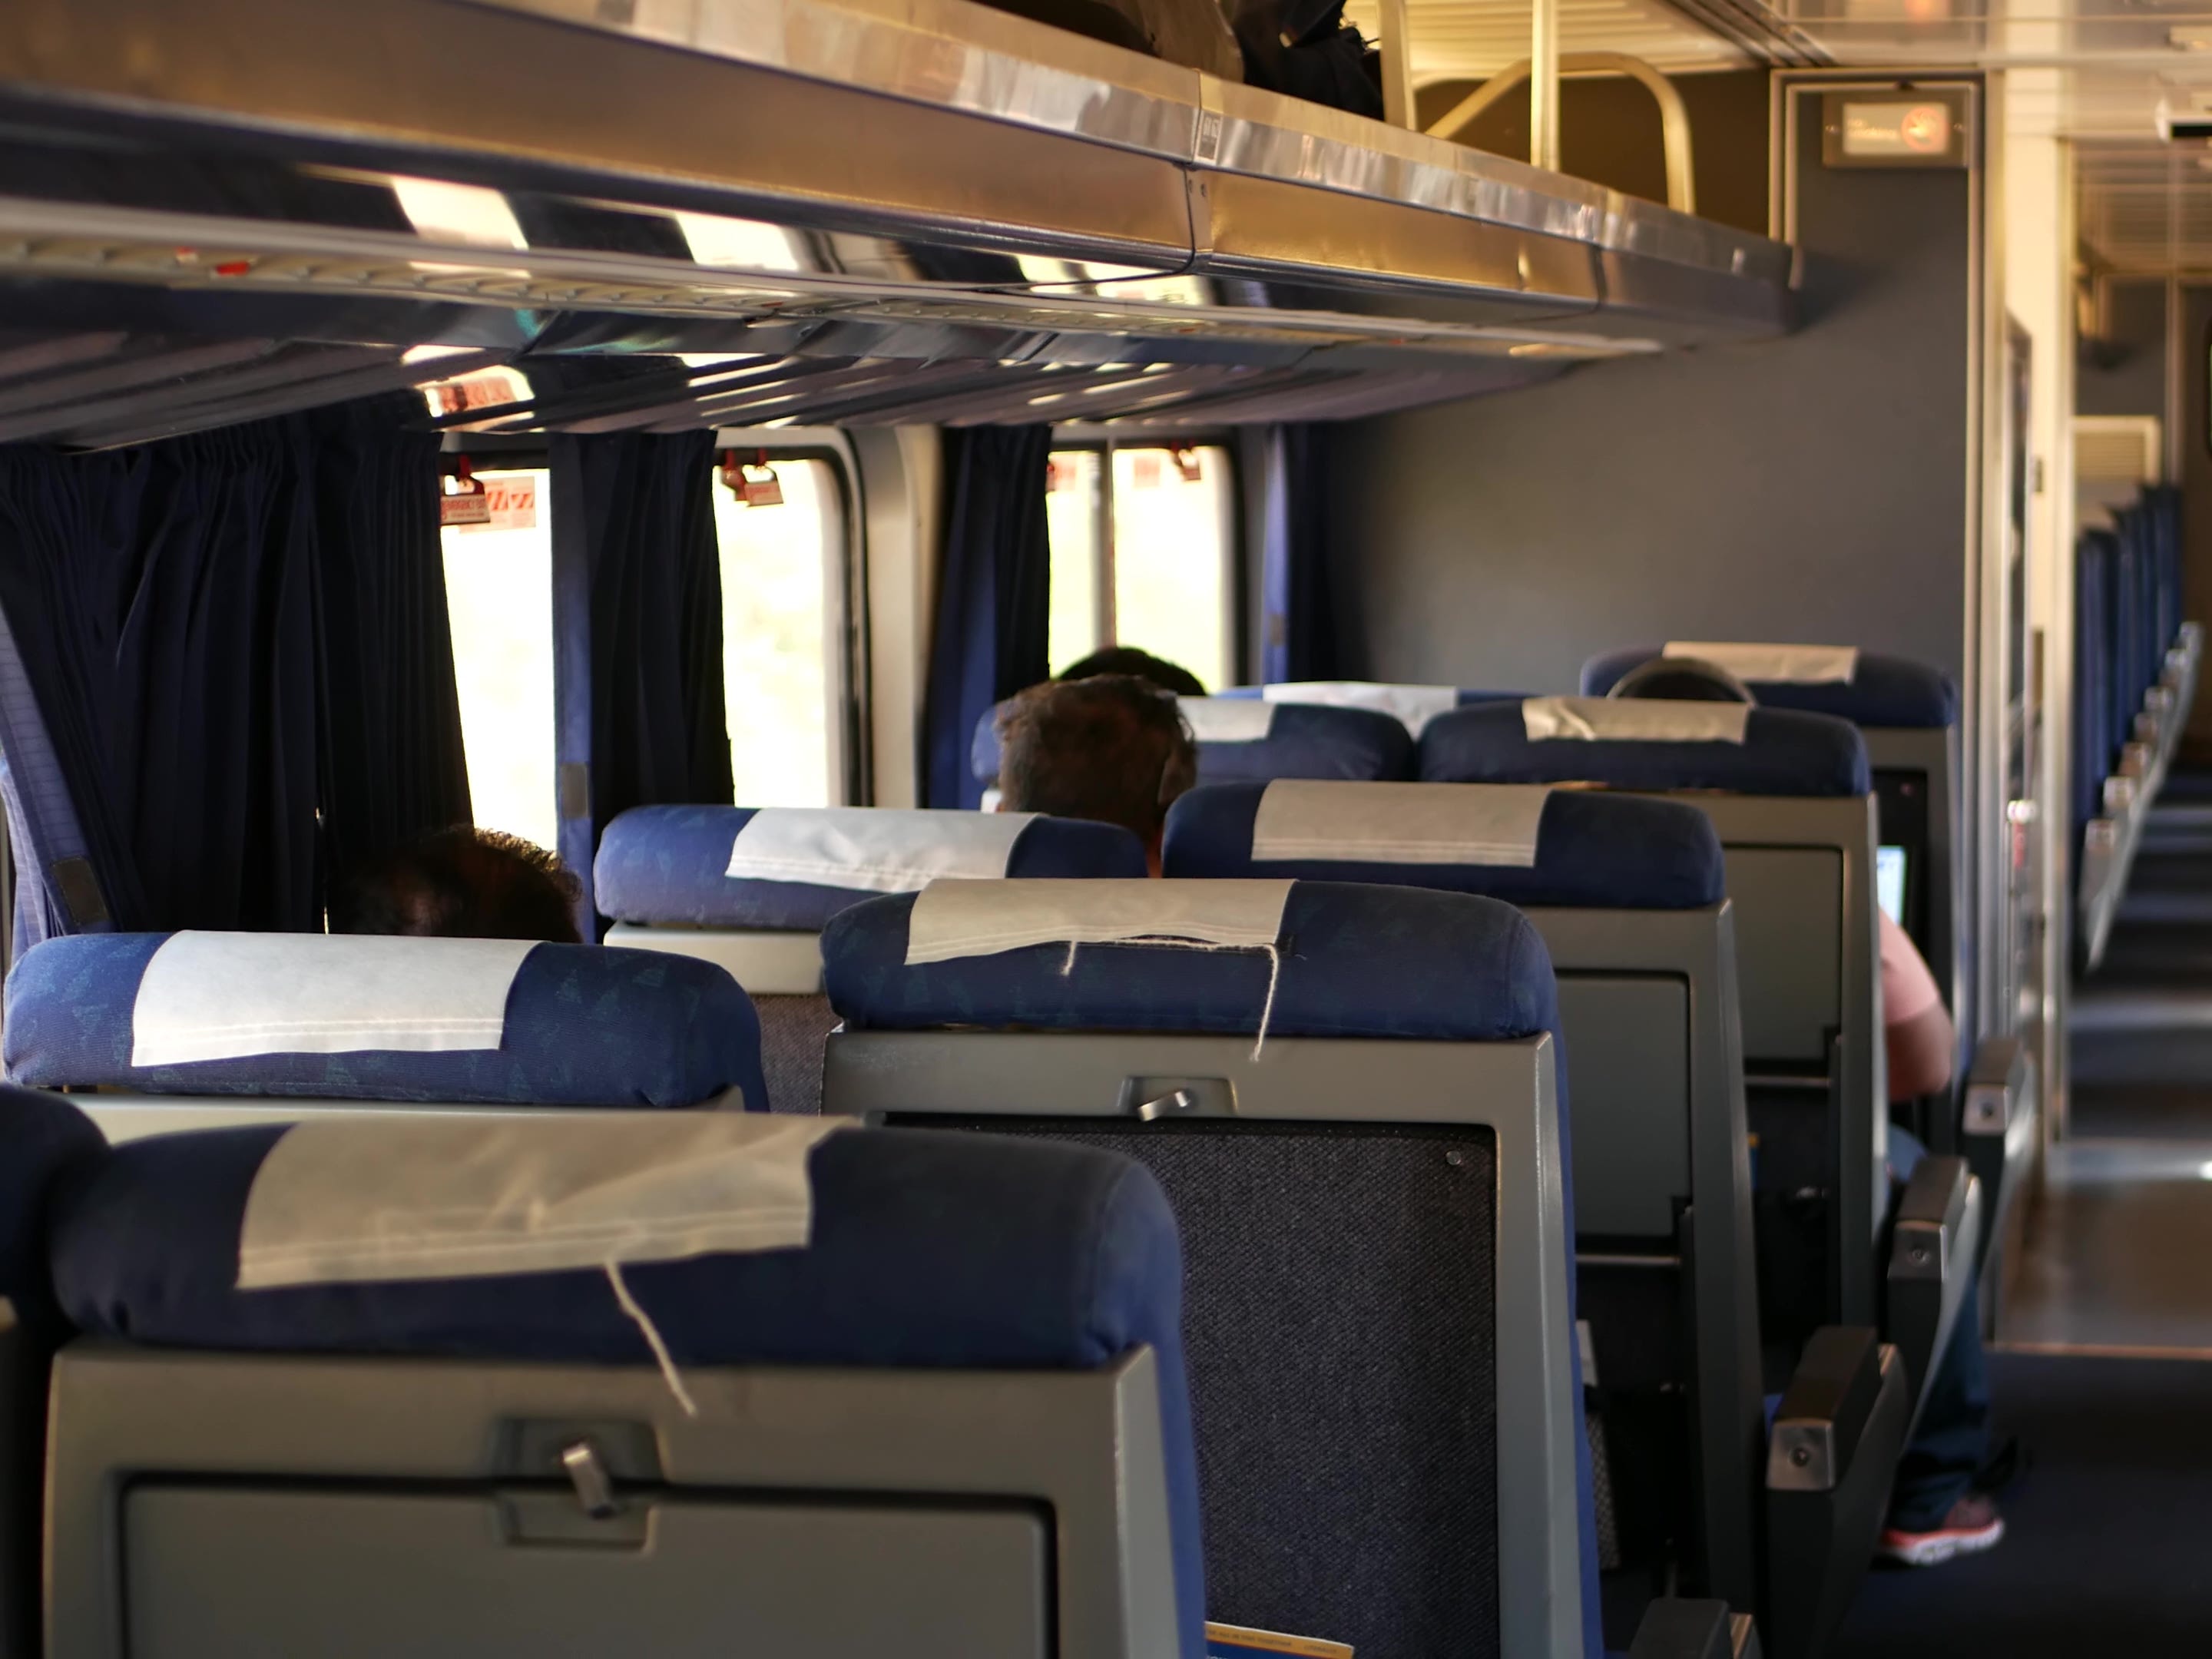 <p>It's no surprise that traveling can make you feel a bit cramped, especially if you're constricted to a car seat for a long drive.</p><p>Regardless of how I travel, I'm always very eager to reach my destination and stretch my legs. In my experience, I've found that even the most bare-bones Amtrak trains <a href="https://www.insider.com/why-train-travel-better-for-plus-size-people-than-flying">offer wider seats</a> than I've seen in most cars and a reasonable amount of legroom.</p><p>The trains' observation and <a href="https://www.insider.com/amtrak-dining-car-surprising-things-from-frequent-traveler-2022-12">dining cars</a> are a real treat for my family since they allow us to enjoy peaceful moments, play a rousing game, or simply take advance of the freedom that comes with not being strapped in one place.</p>